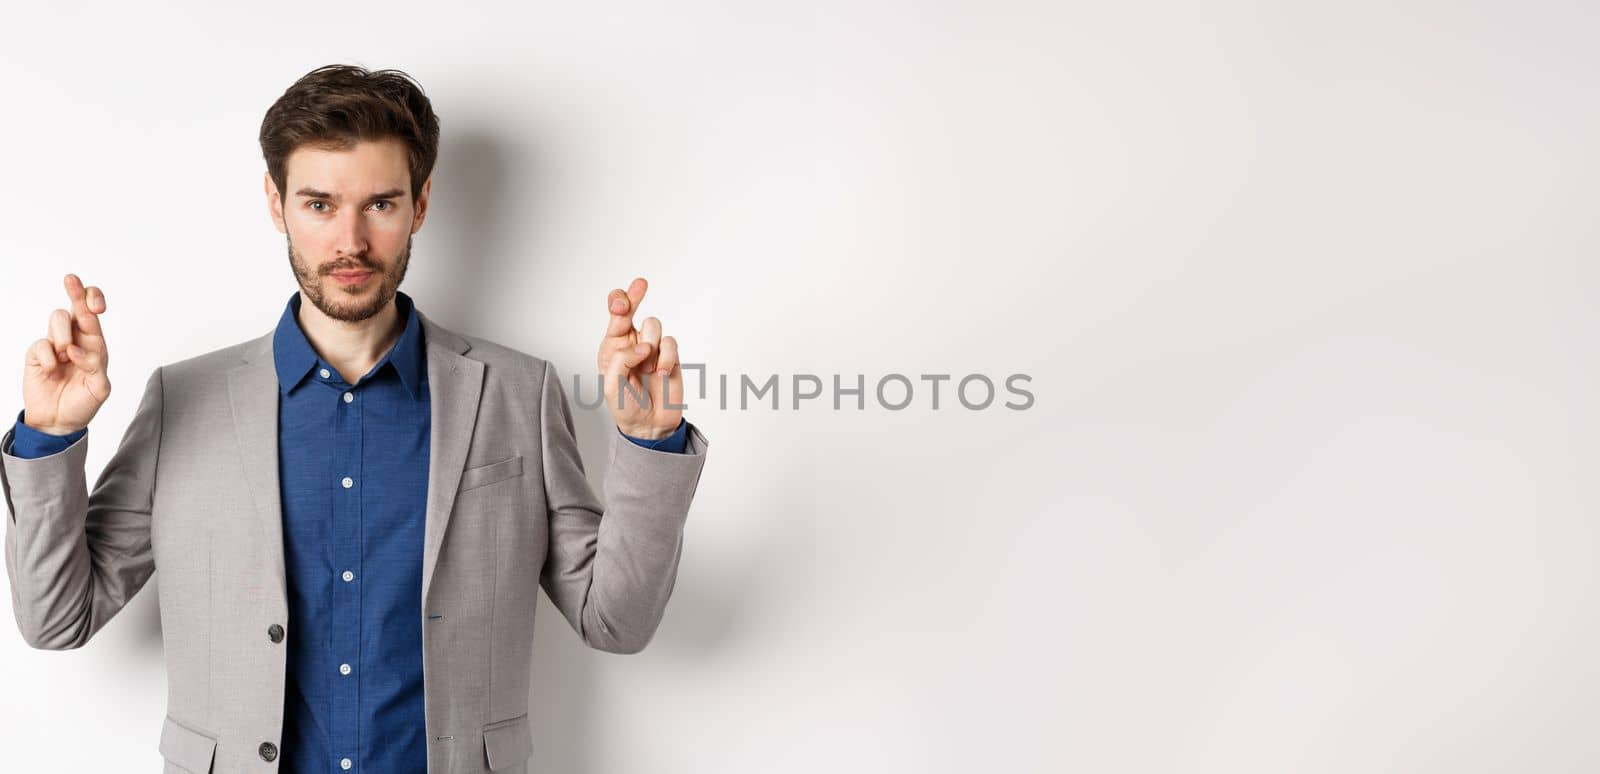 Hopeful man in suit cross fingers for good luck and looking confident in win, feeling determined, standing on white background.